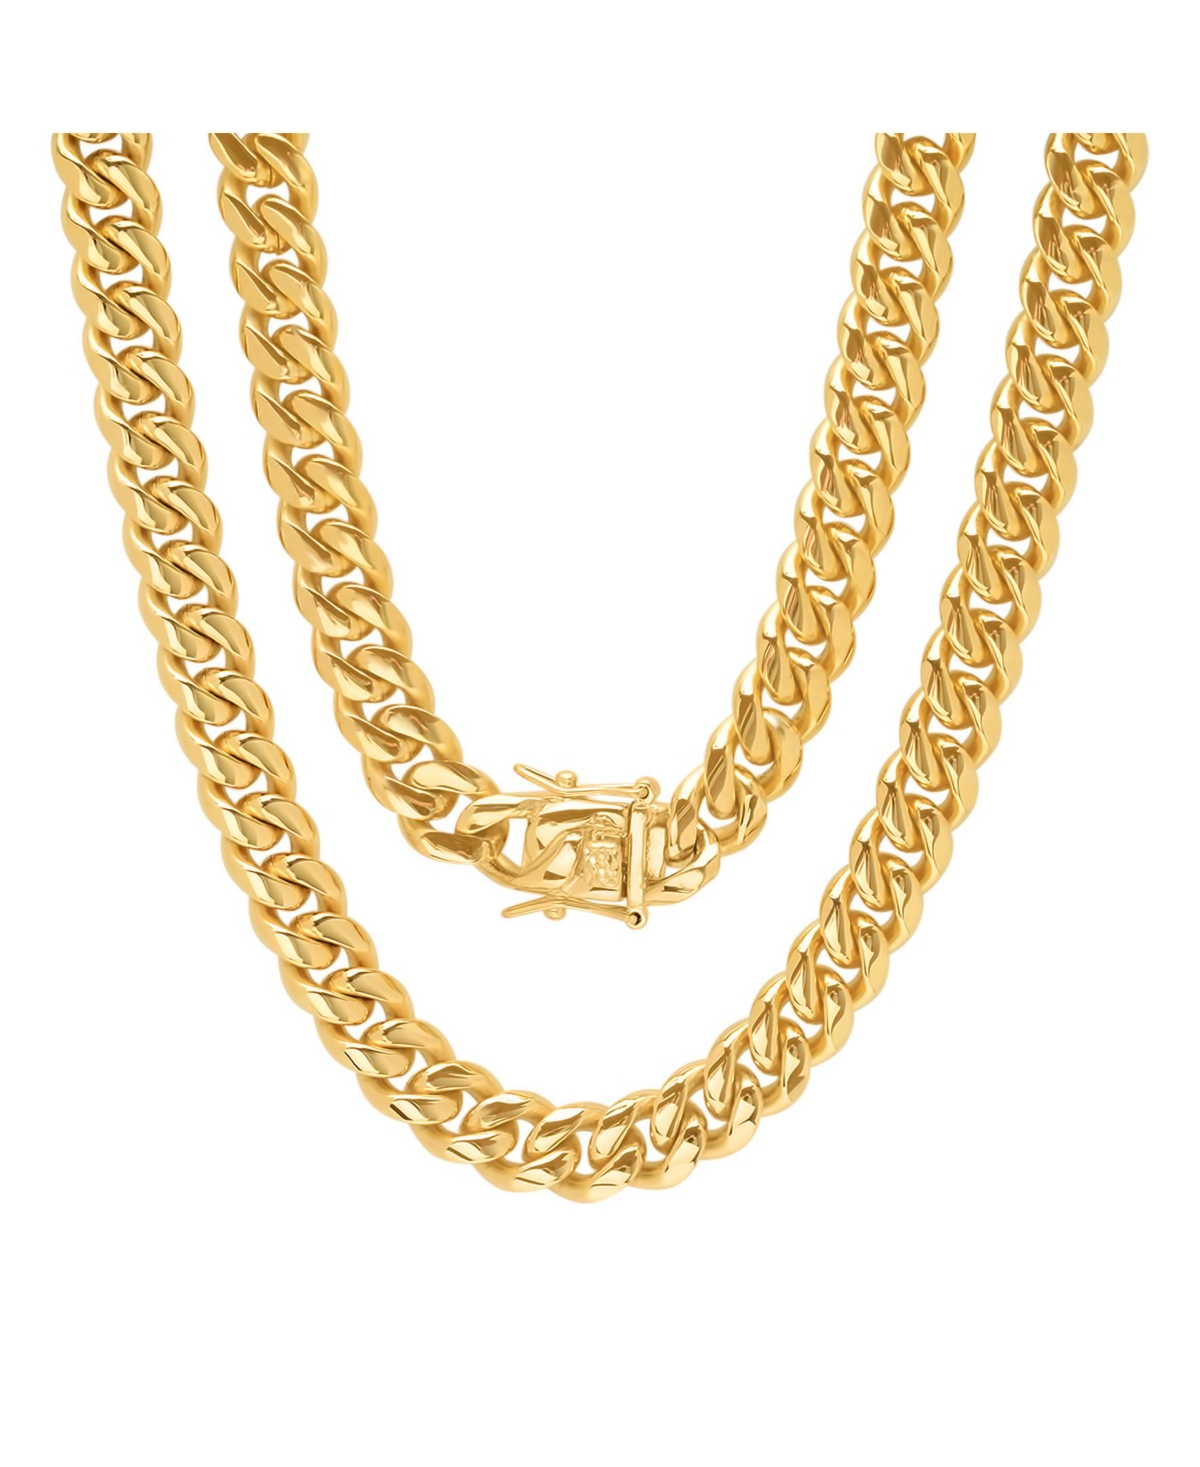 Men's 18k gold Plated Stainless Steel 24" Miami Cuban Link Chain with 10mm Box Clasp Necklaces - Gold